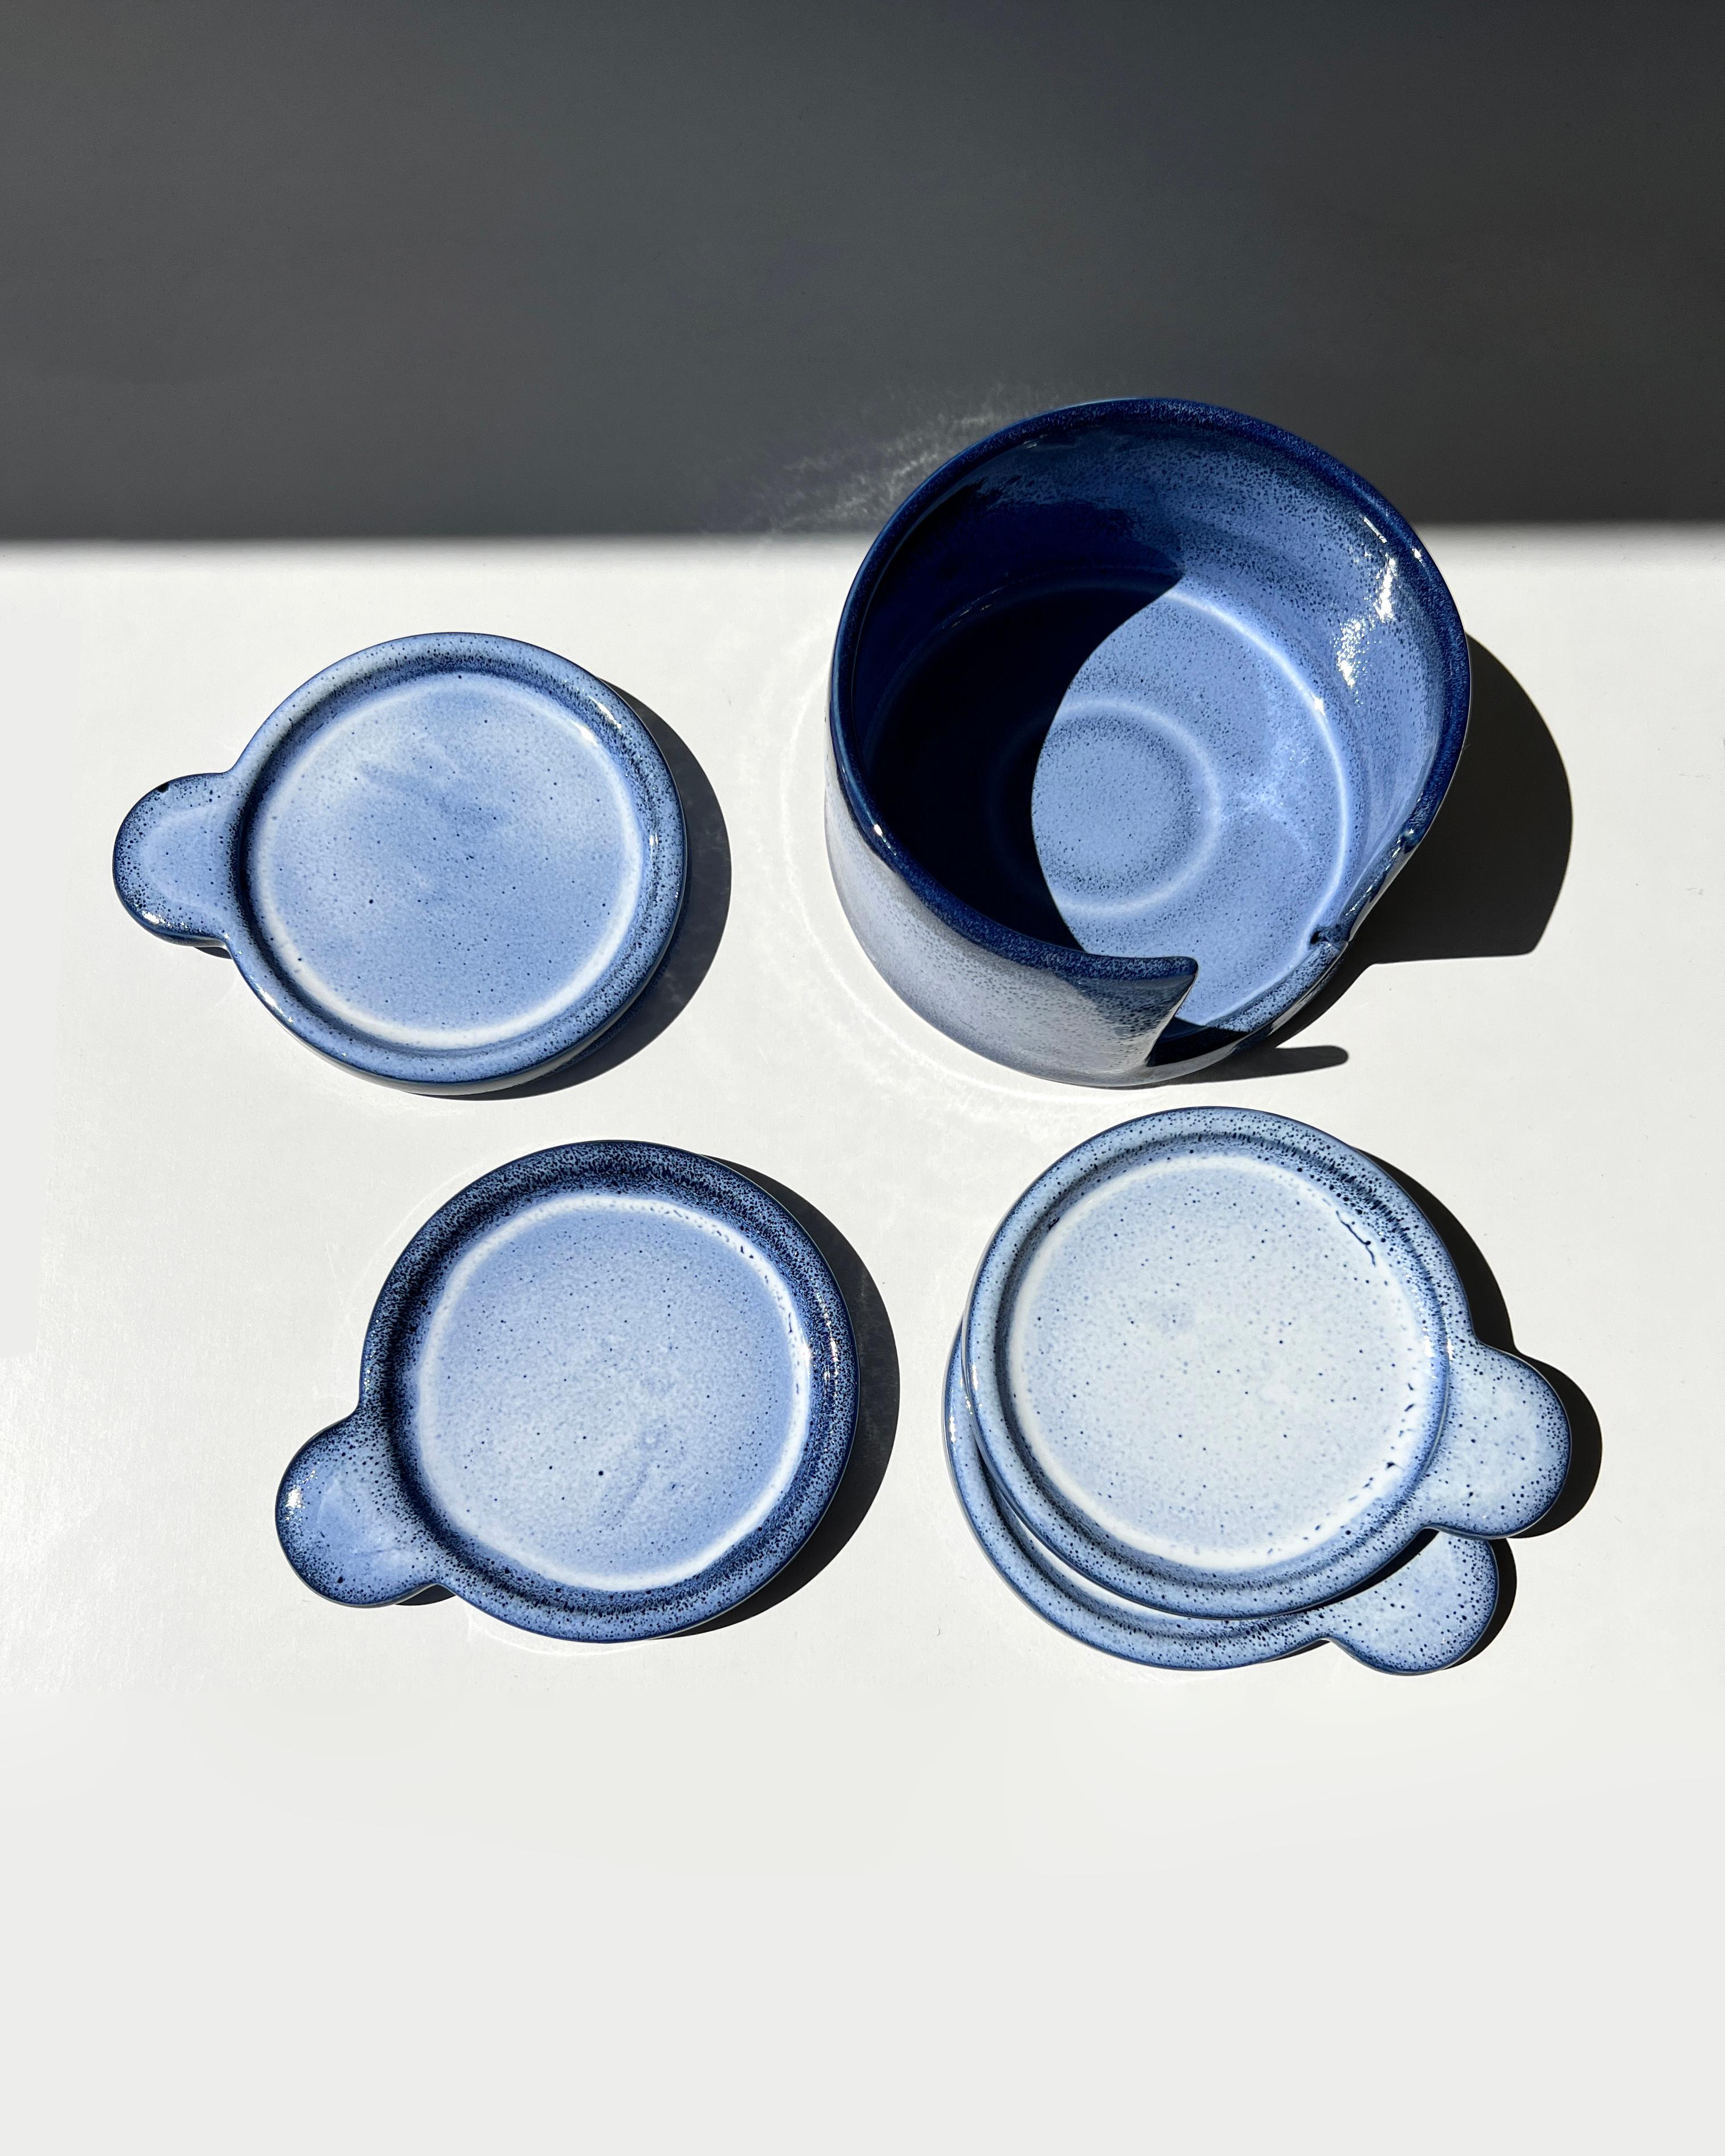 The perfect set of plates for Tapas Night. Handcrafted by skilled artisans in Mexico, the Anna Indigo Handmade Tapas Plate Set is the perfect addition to any modern home. With a beautiful indigo blue and white glaze, these rustic plates are perfect